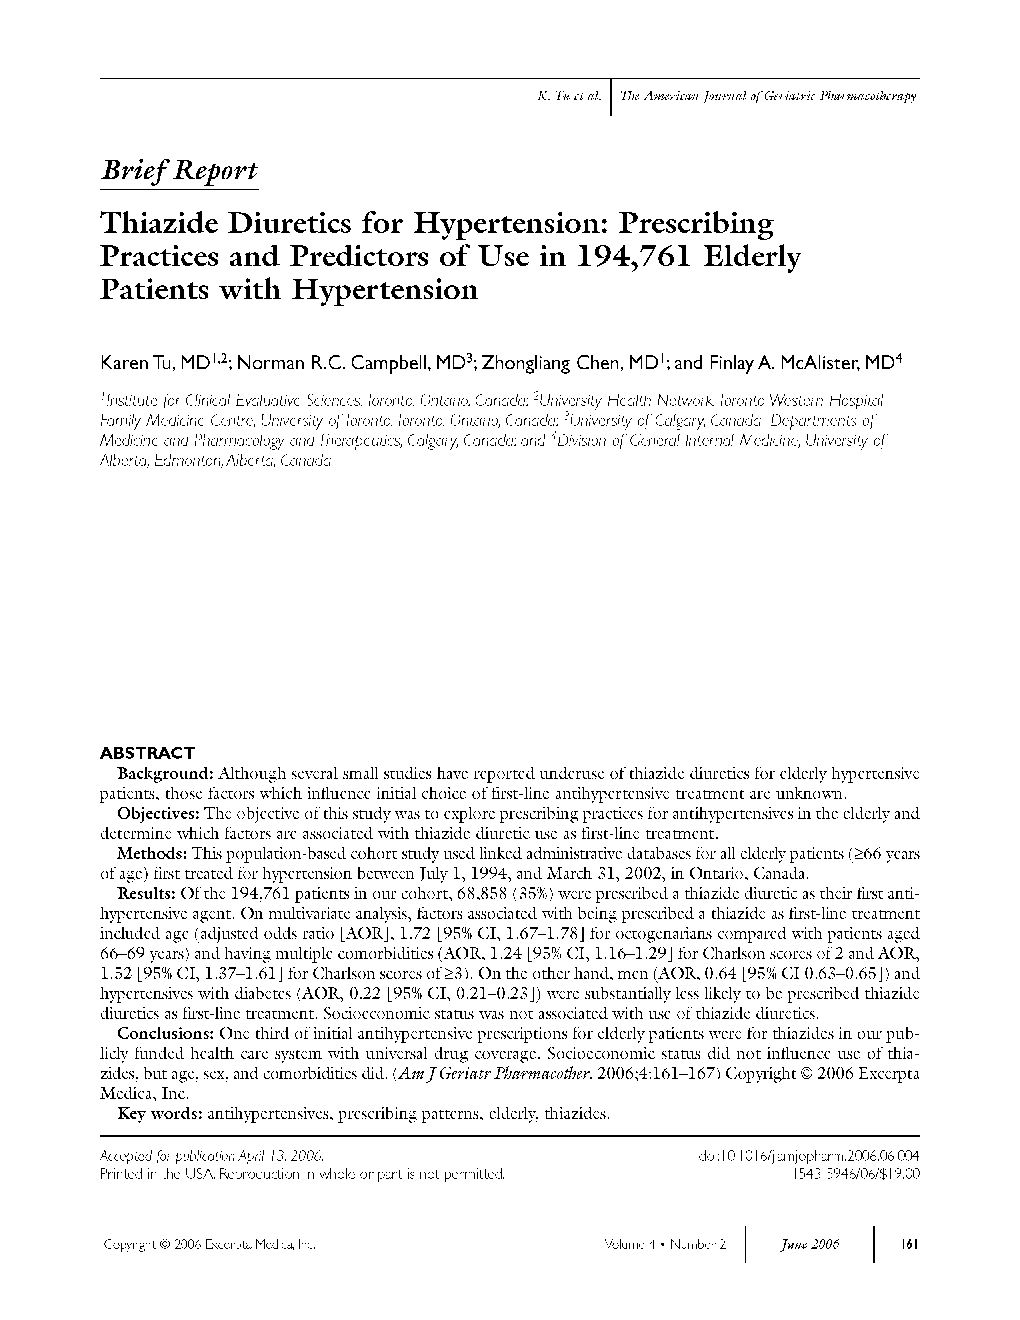 Thiazide diuretics for hypertension: Prescribing practices and predictors of use in 194,761 elderly patients with hypertension